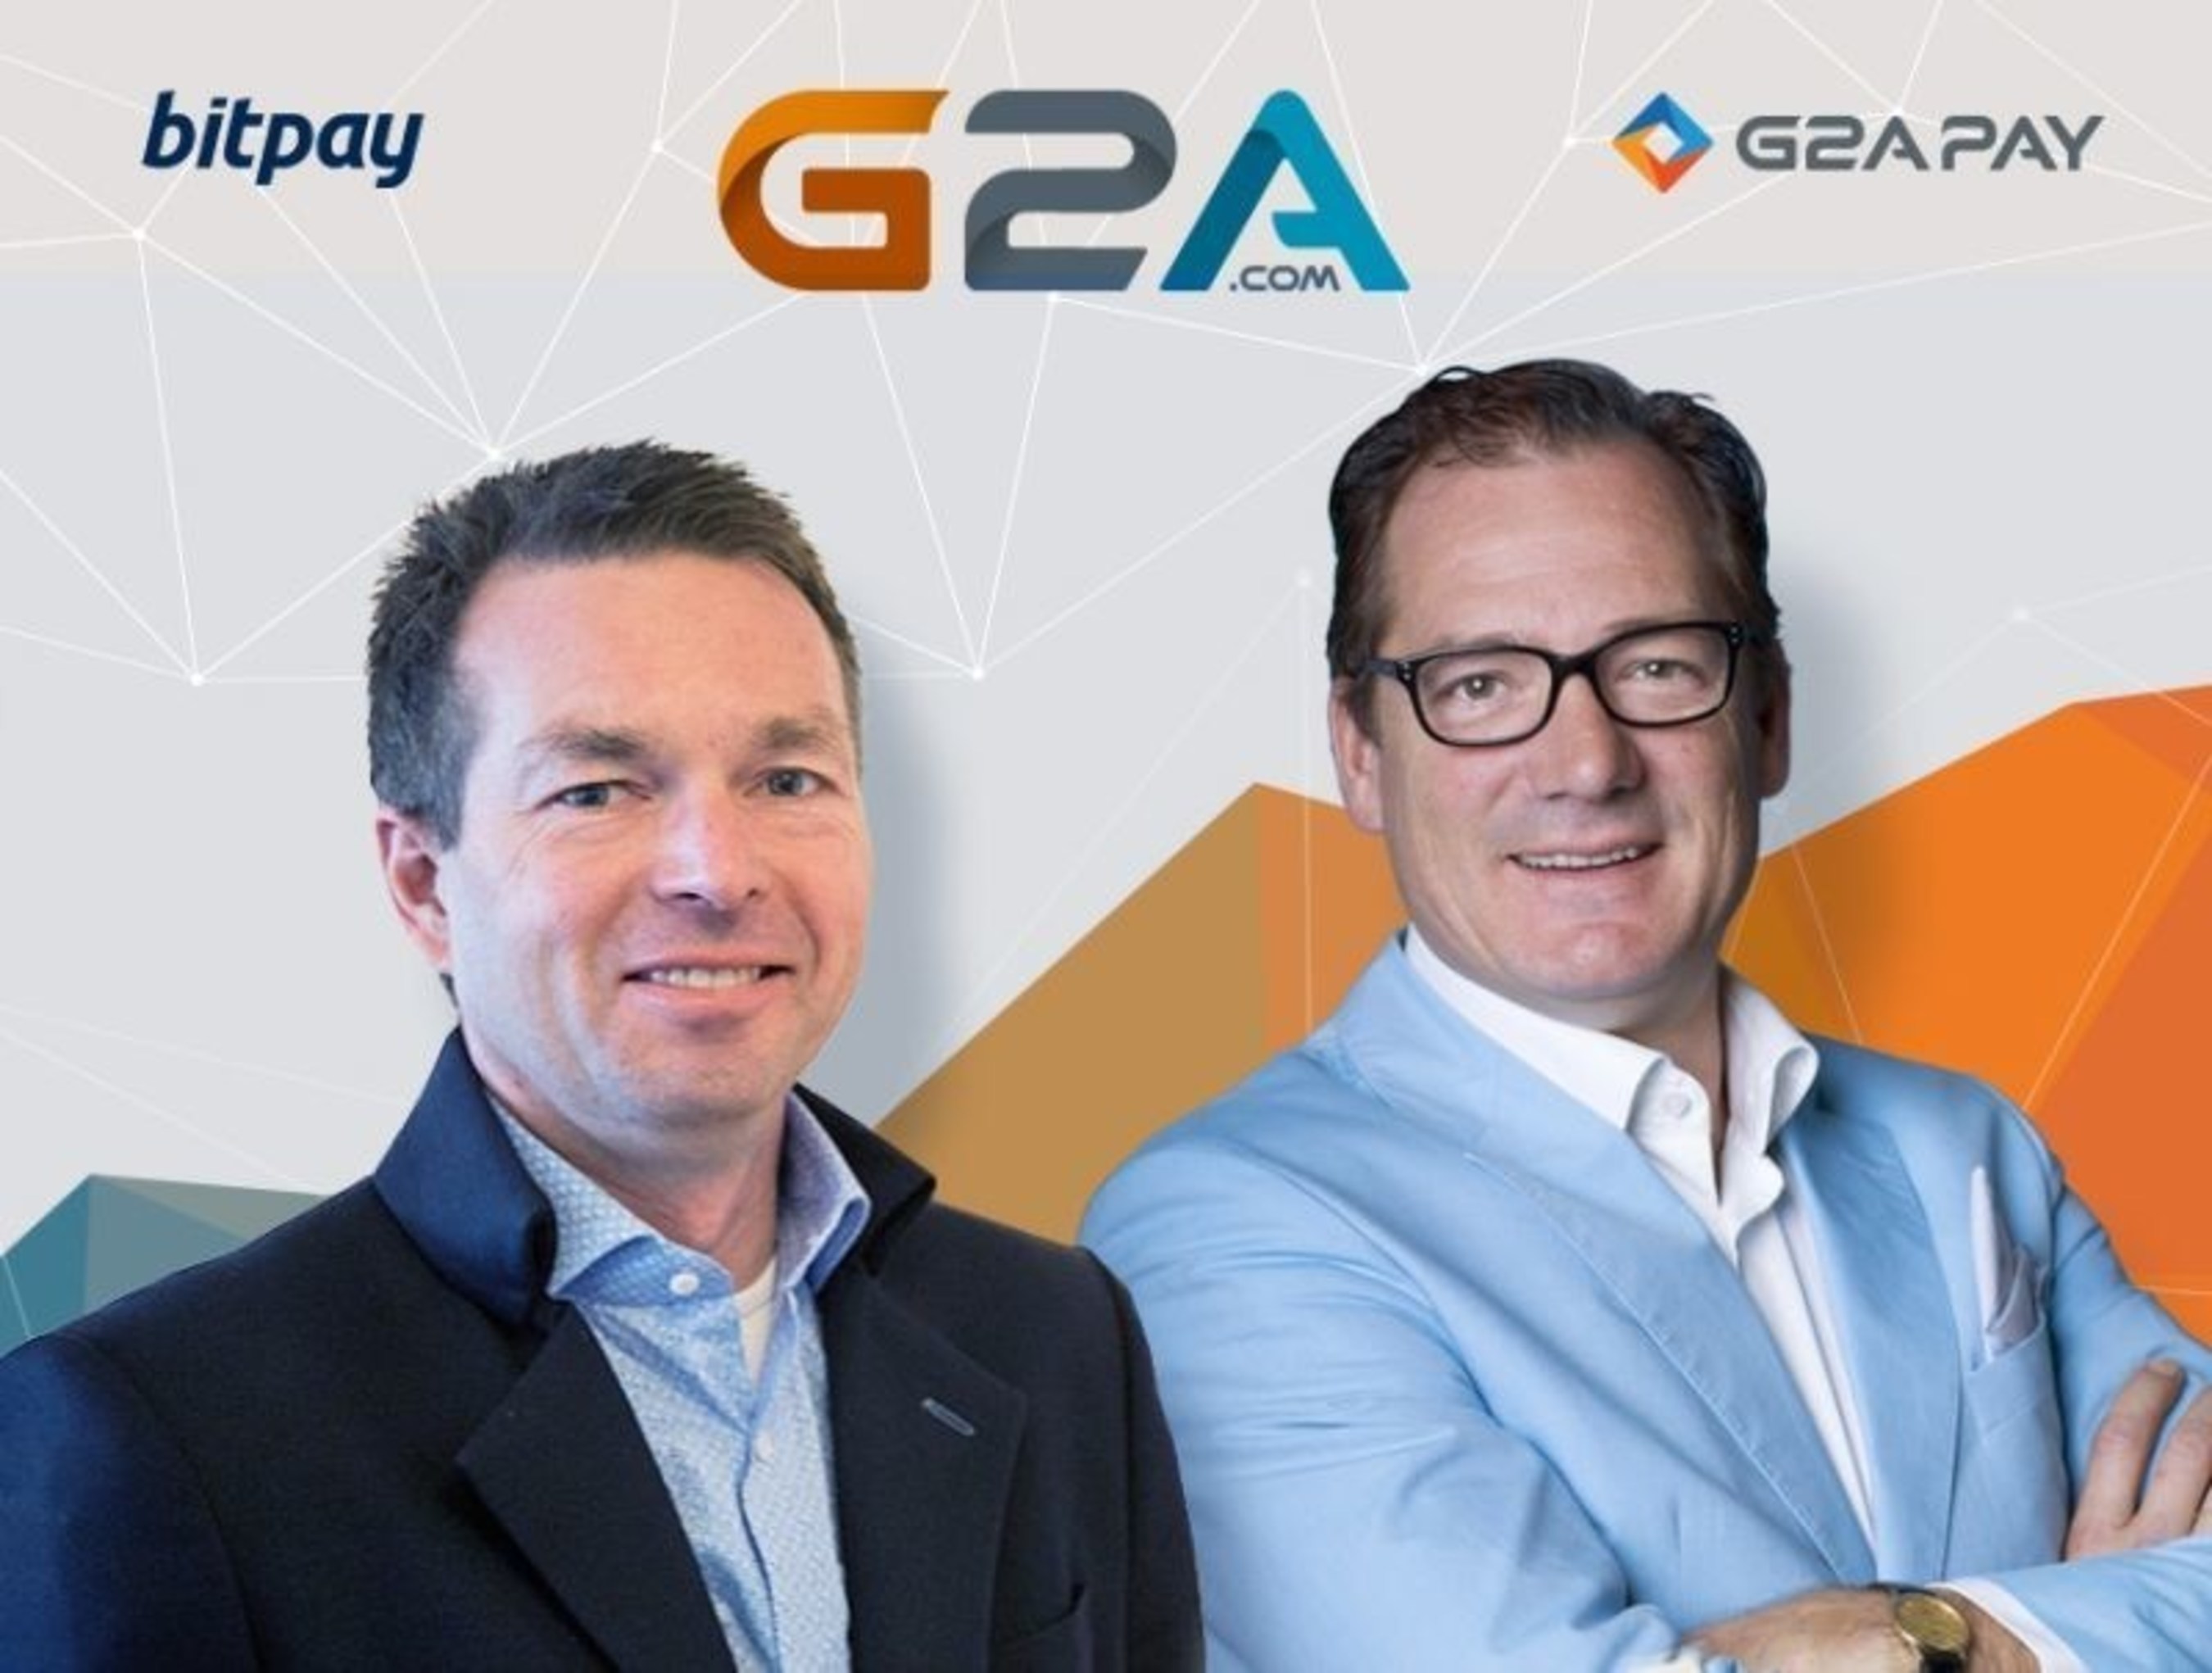 Marcel Roelants, General Manager of BitPay EMEA and G2A.COM Executive VP of Global Payments Bob Voermans are delighted with the G2A.COM BitPay partnership (PRNewsFoto/G2A.com) (PRNewsFoto/G2A.com)